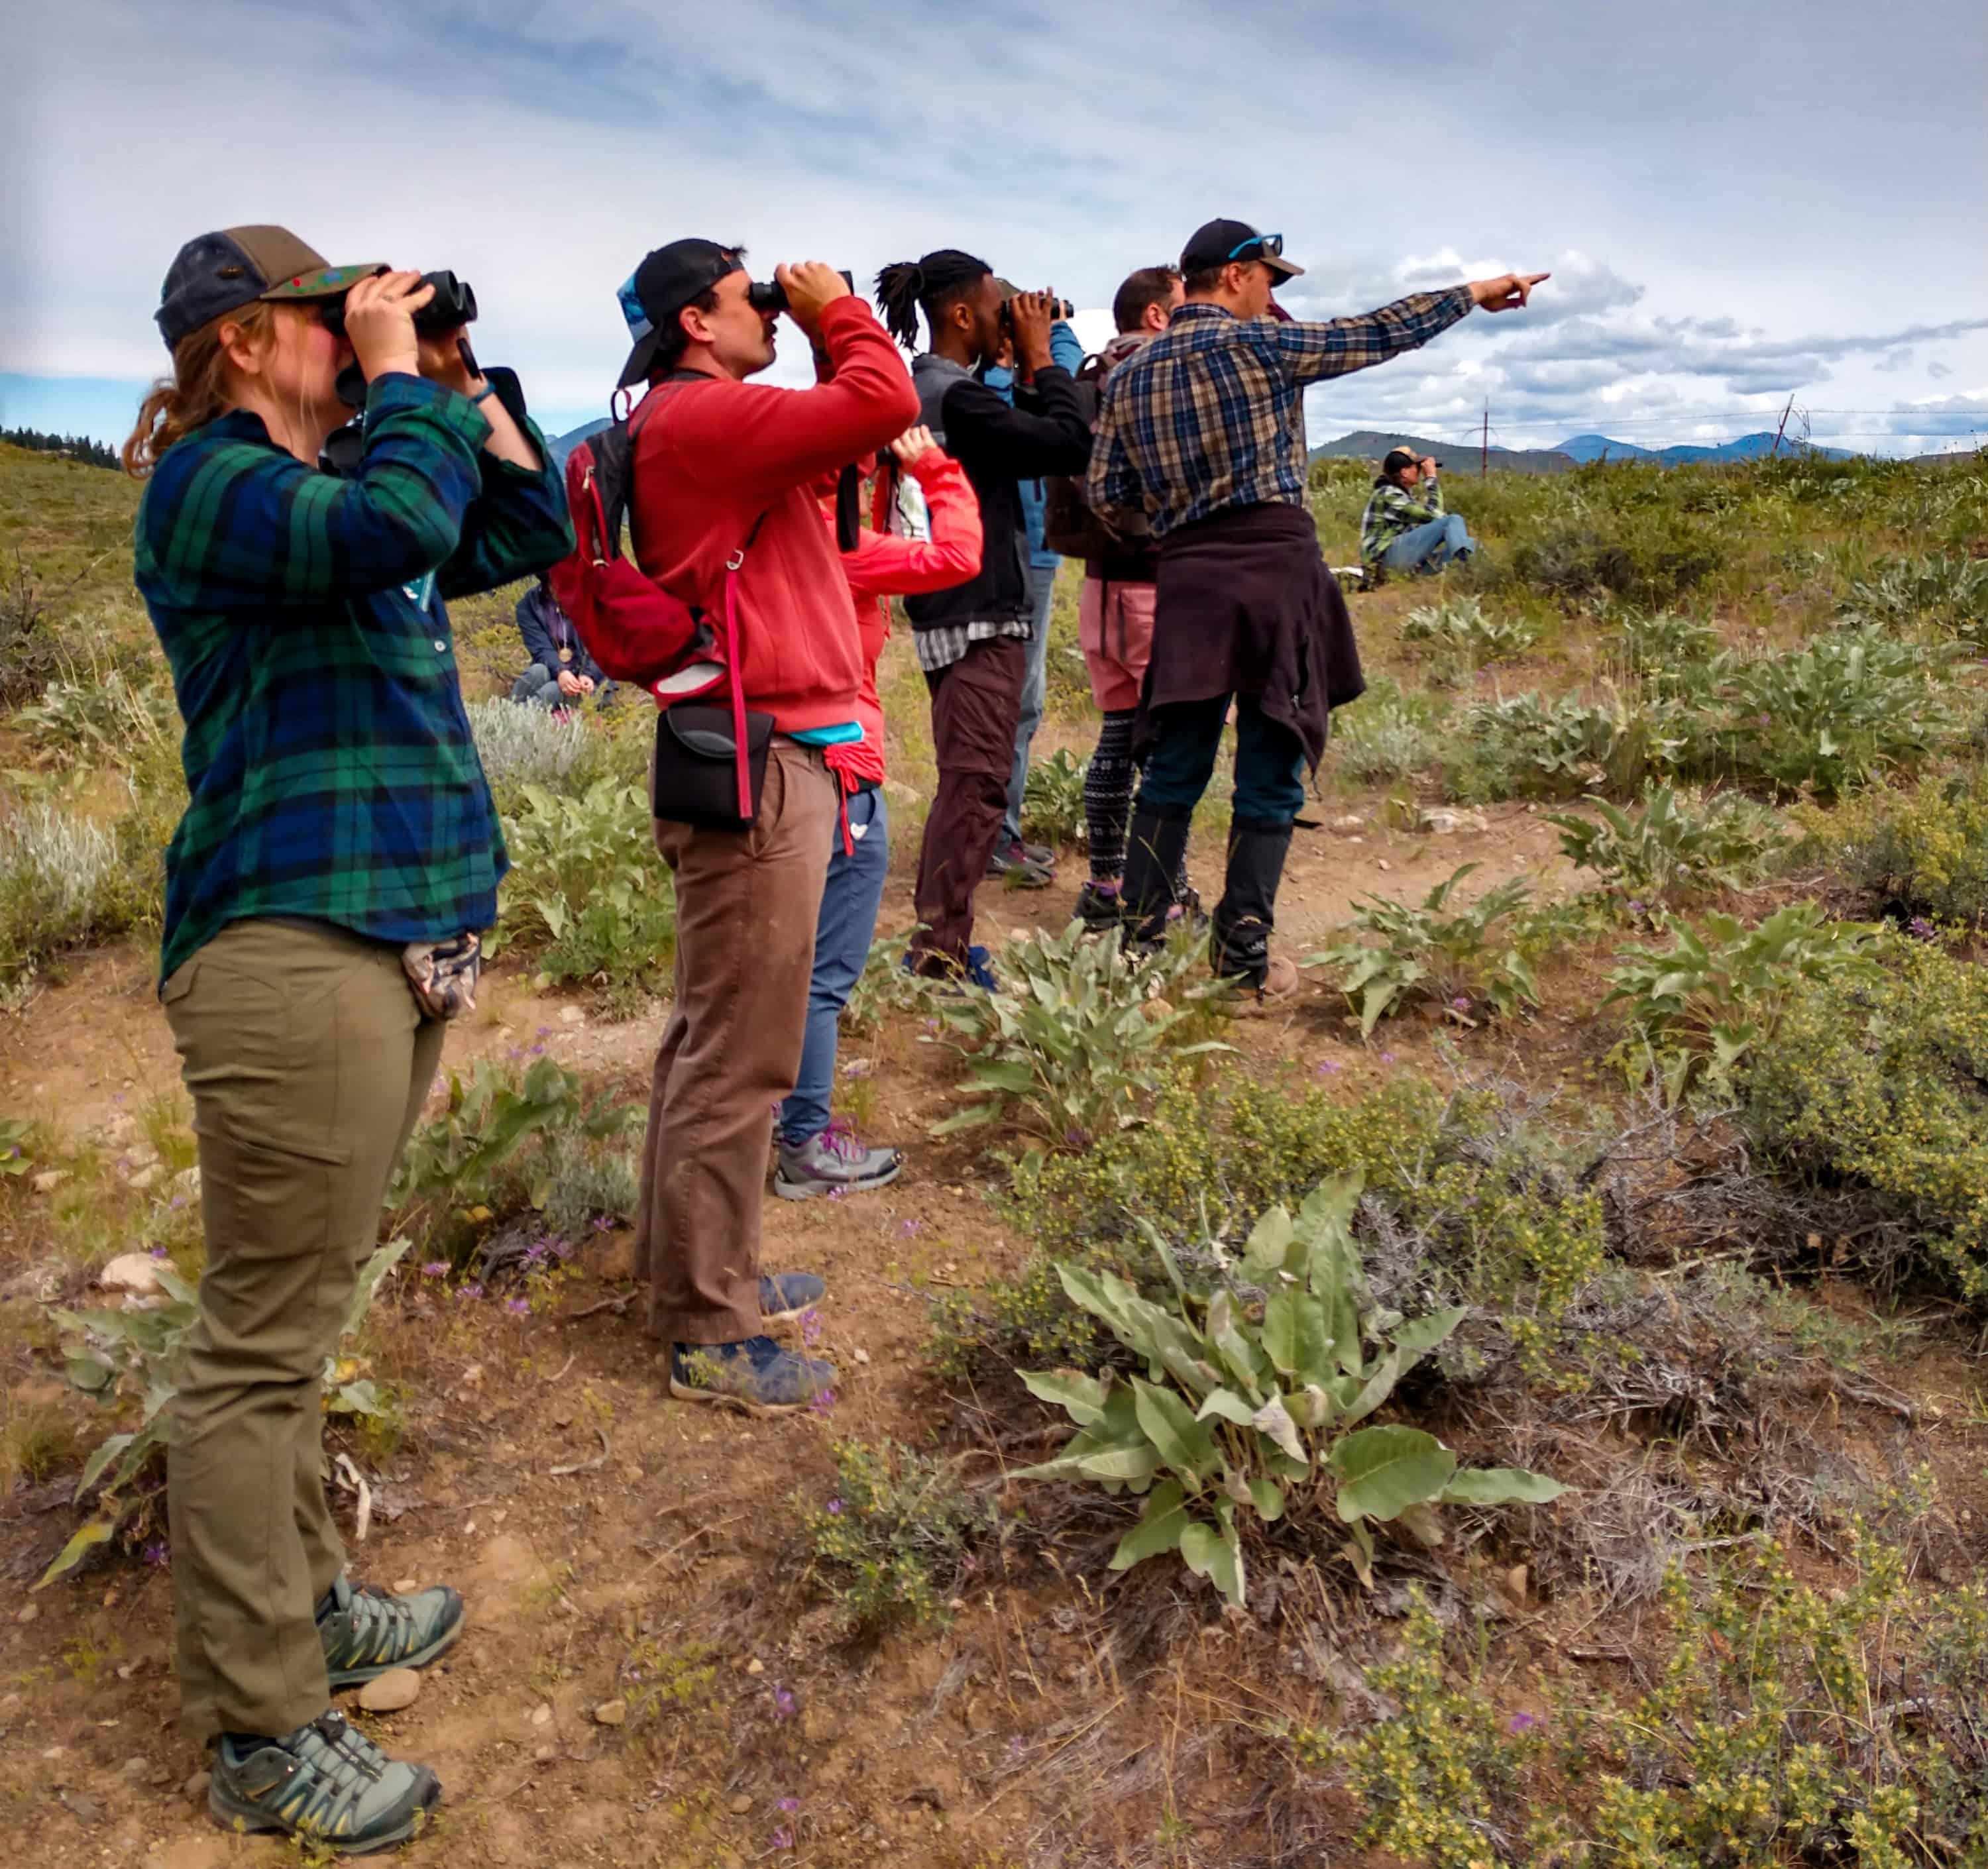 Graduate students in a field using binoculars to make observations